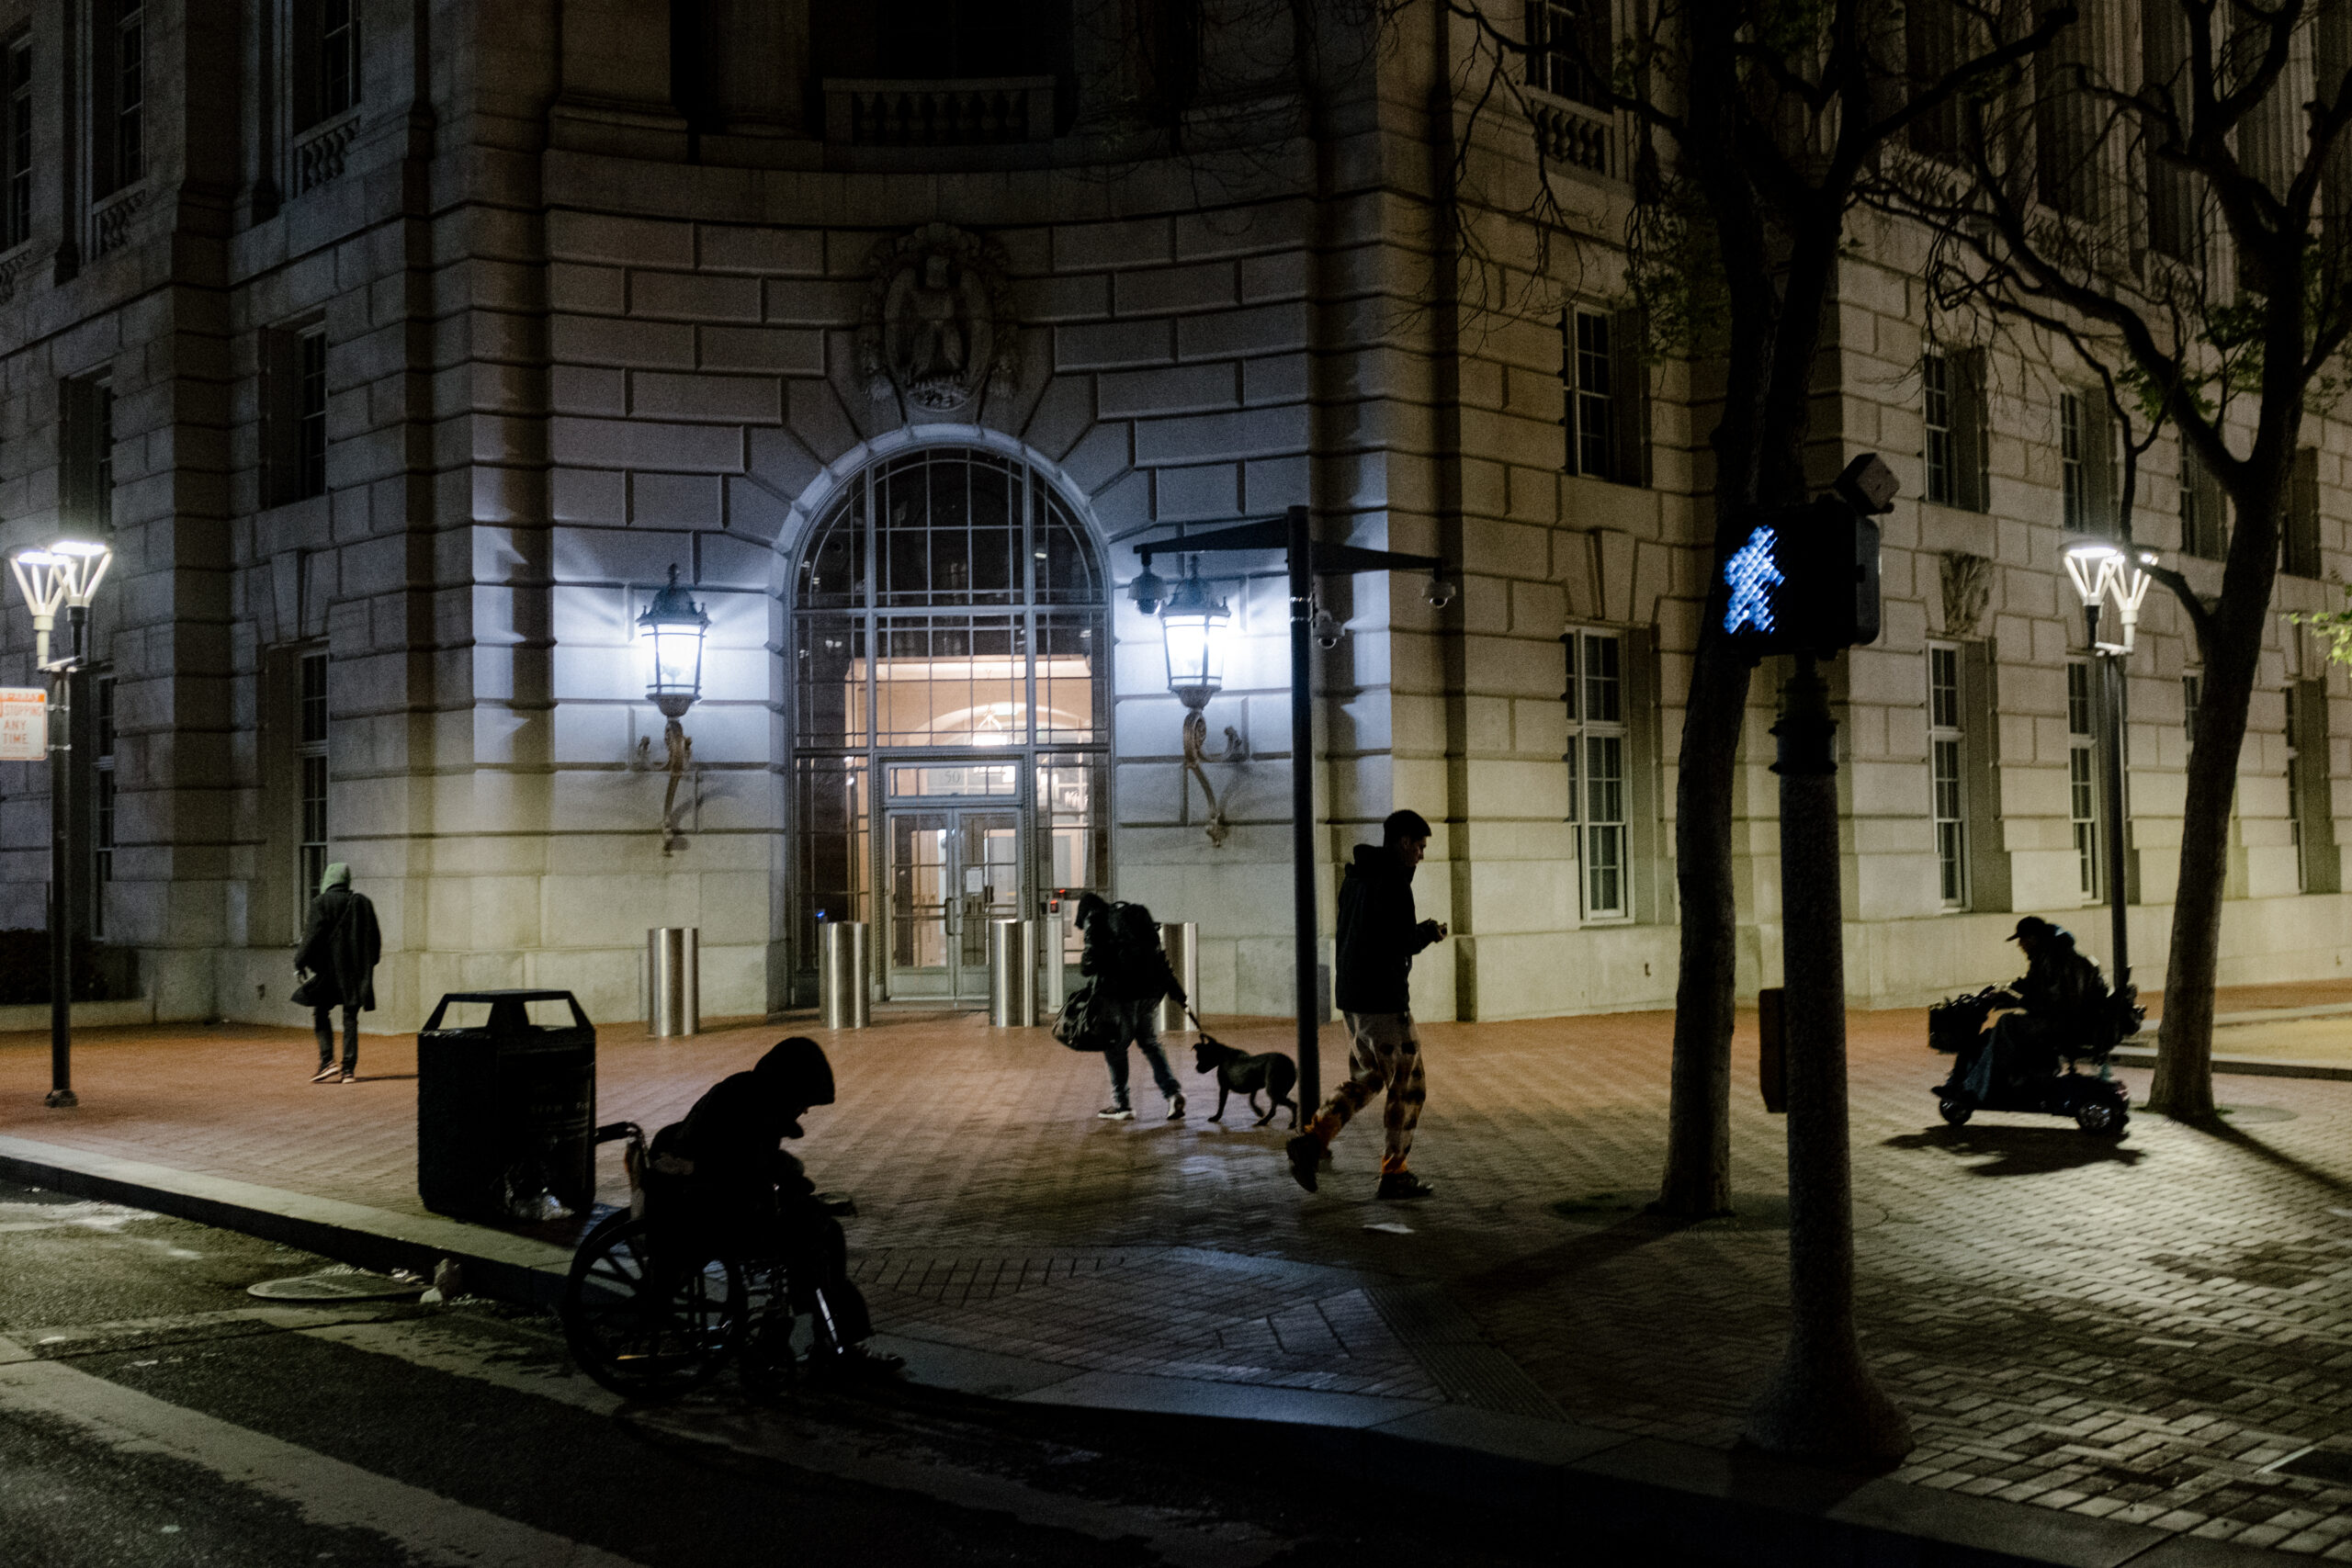 Nighttime street scene with people walking, a person in a wheelchair, and a dog outside an illuminated building.